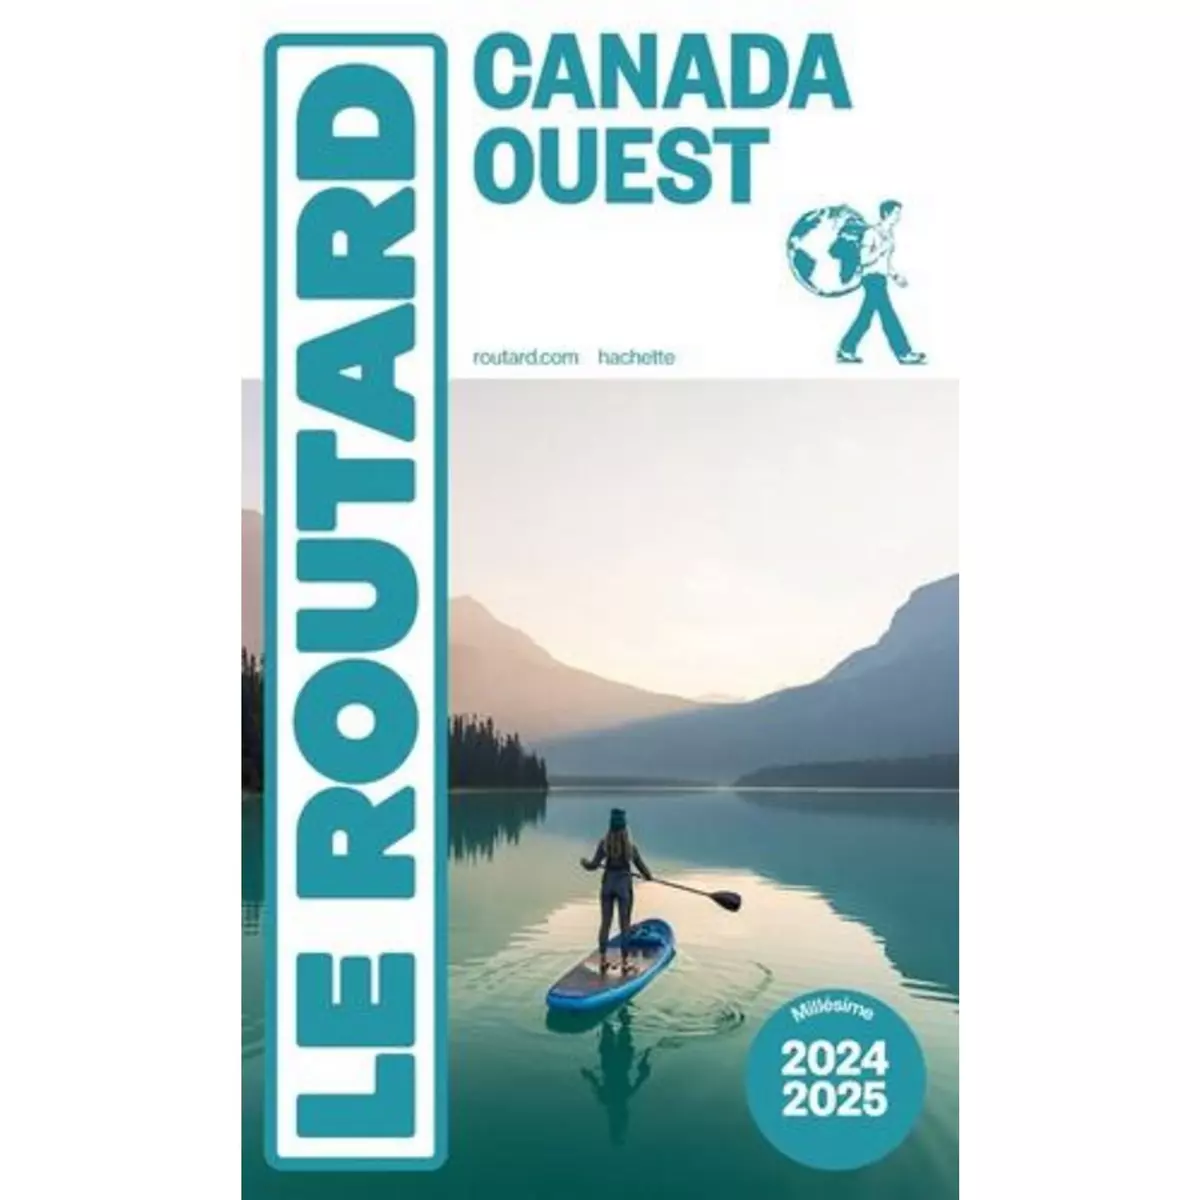  CANADA OUEST. EDITION 2024-2025, Le Routard